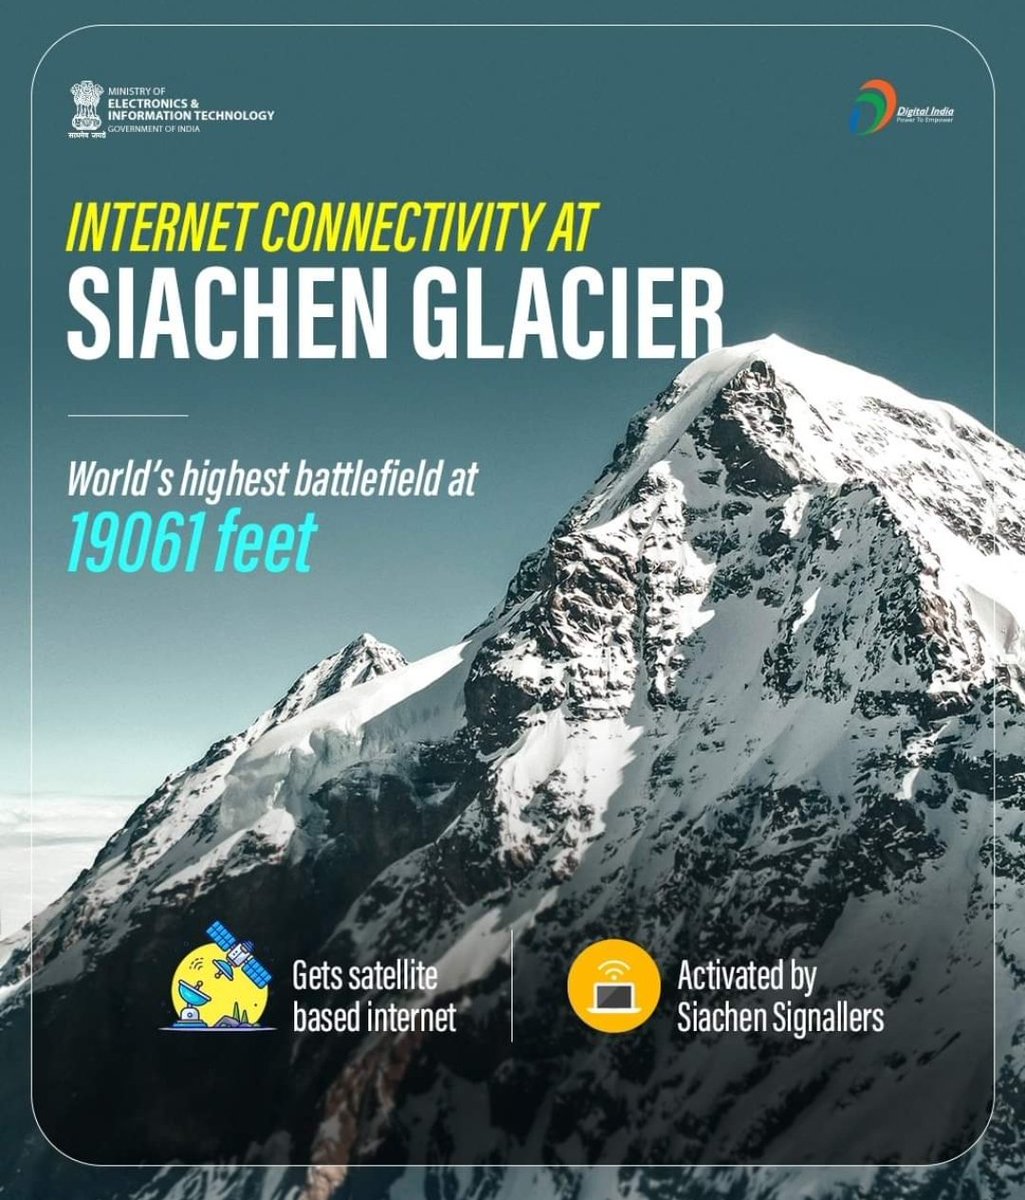 #Internet #connectivity at #SiachenGlacier❄️ #Reaching #new heights with #DigitalIndia
#Digital
#DigitalMarketing
#influencer
#SocialMedia
#Online
#VR
#cybersecurity
#developers
#Coding
#code
#programming
#4G
#5G
#WiFi
#VirtualPhotography
#onlinelearning
#learning
#ContentCreator